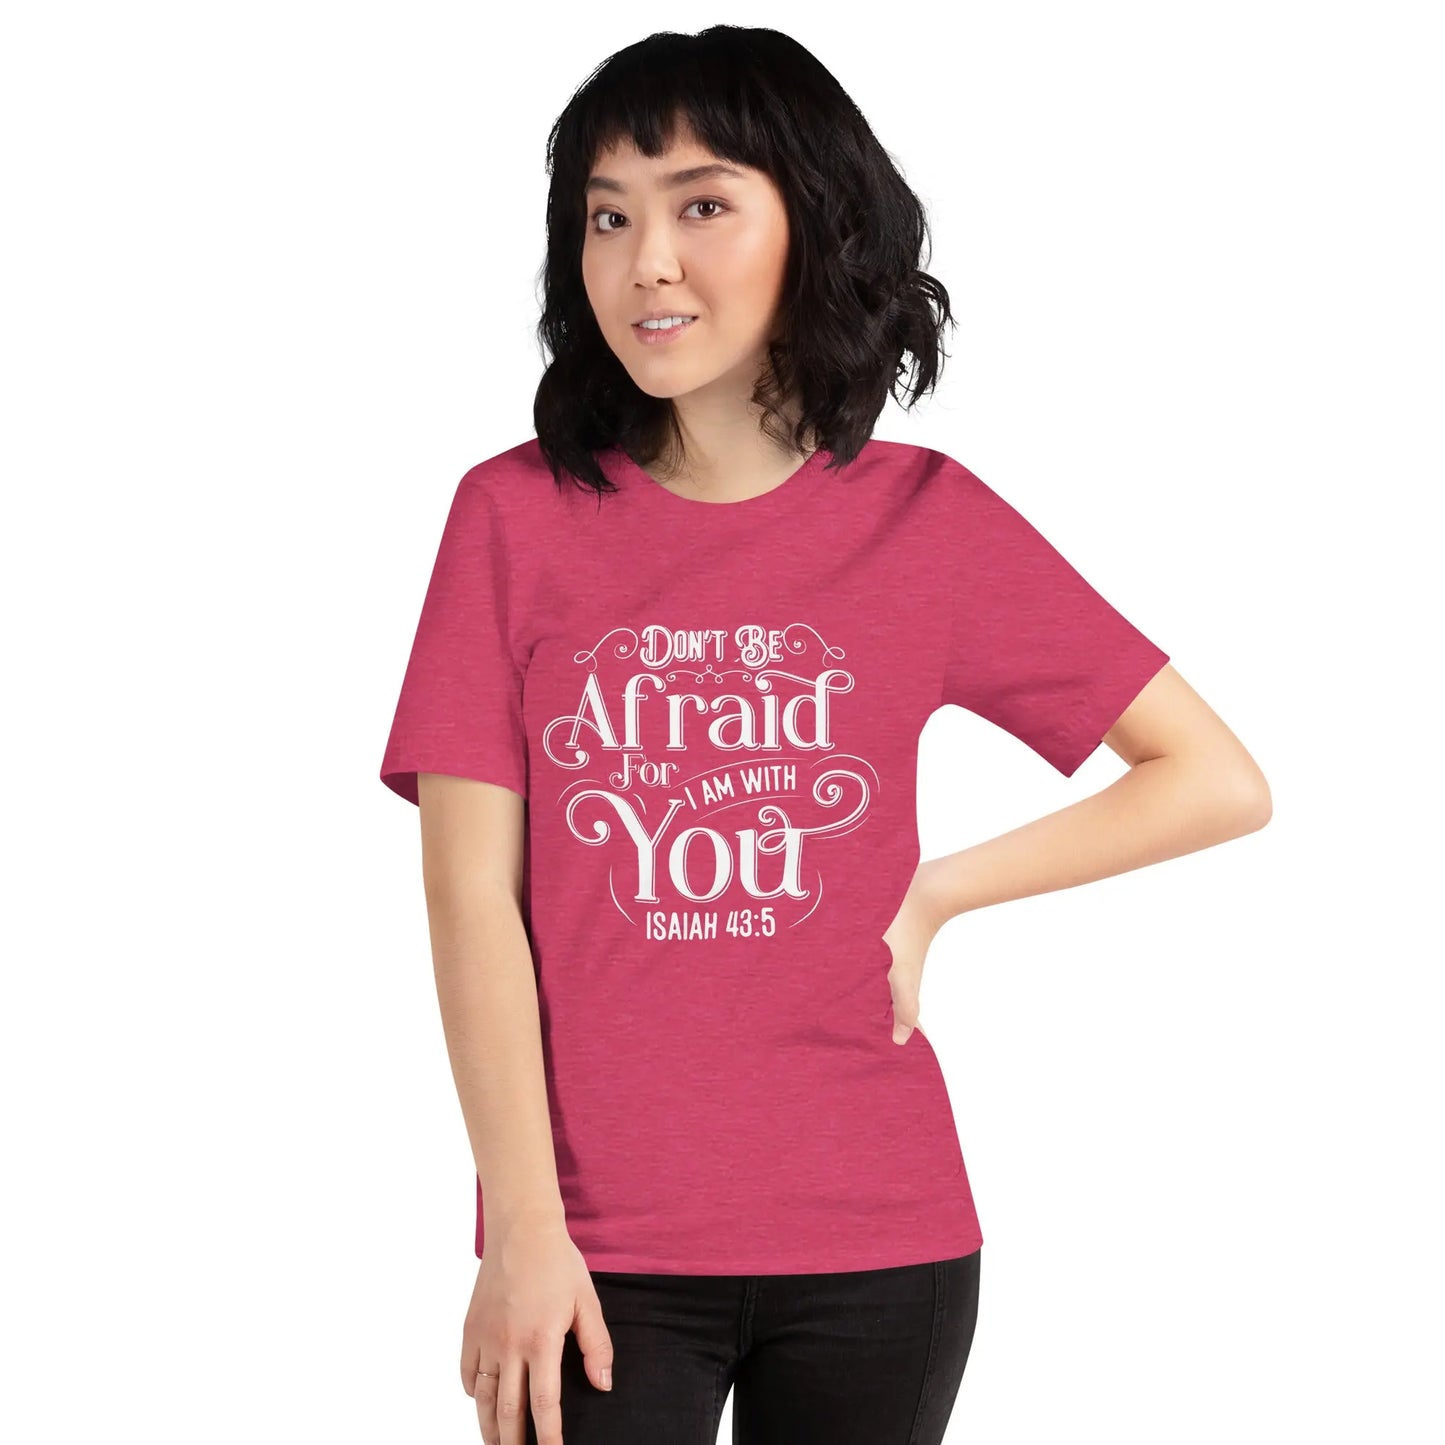 Don't Be Afraid For I Am With You Unisex T-shirt | Isaiah 43:5 Amazing Faith Designs